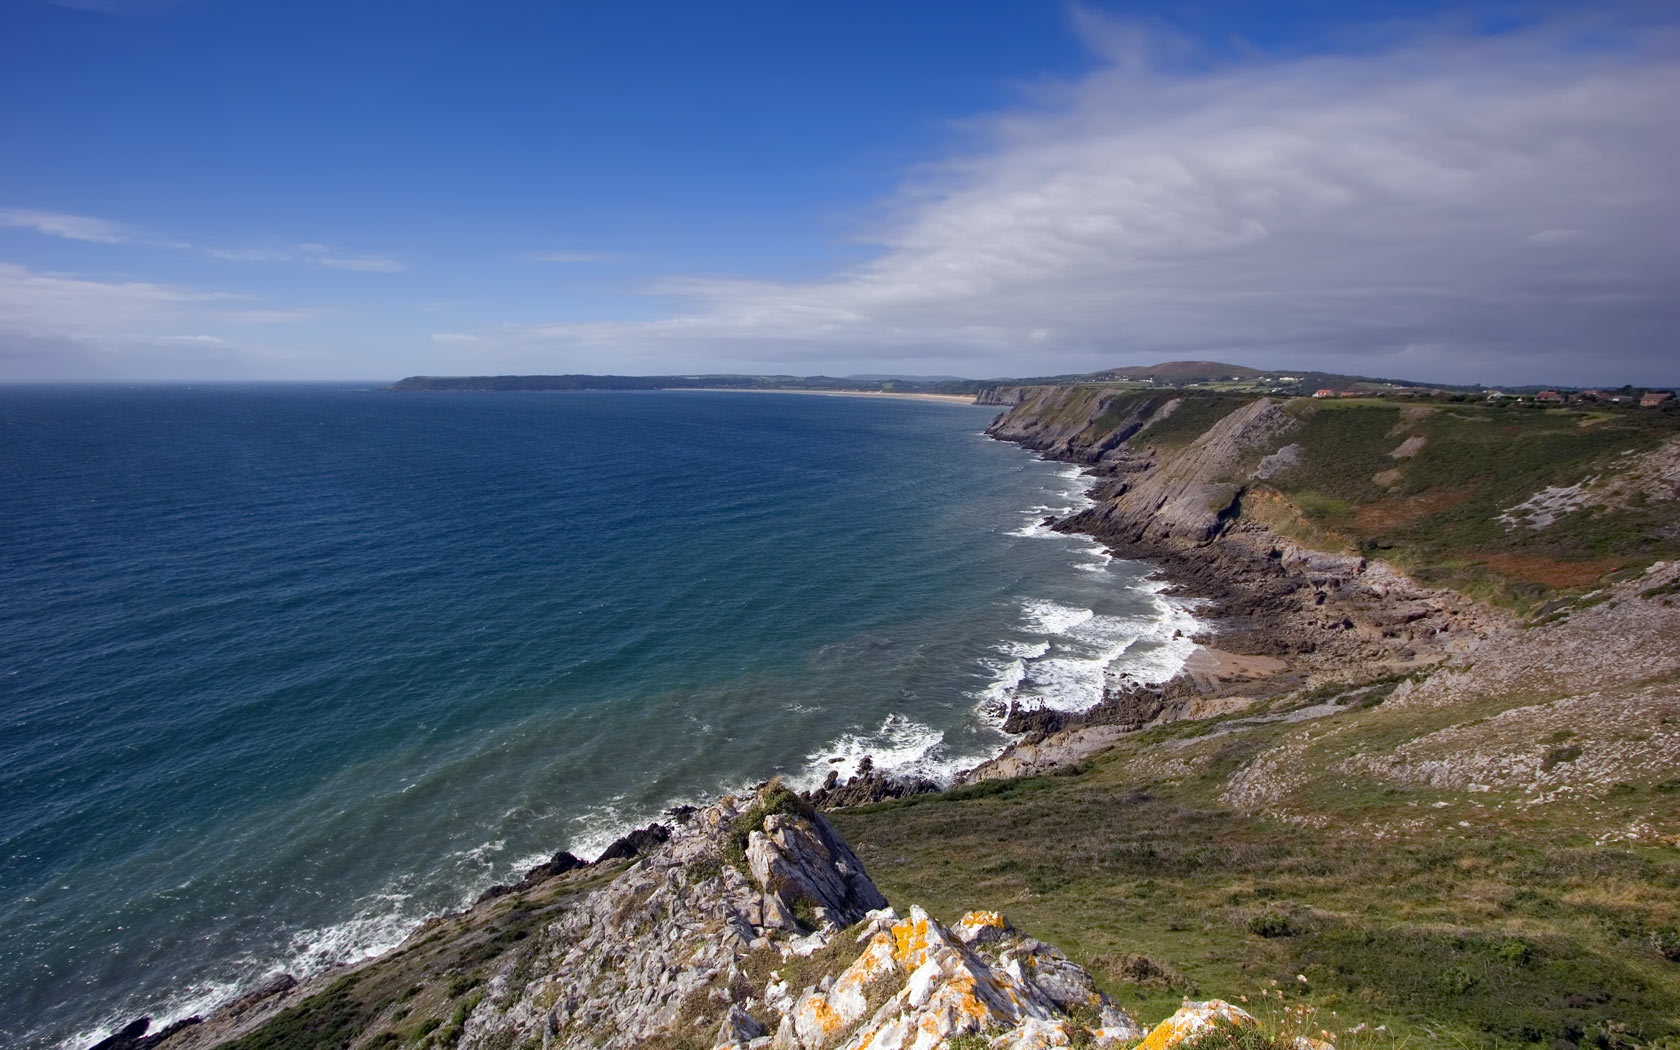 Desktop wallpaper of the sea and cliffs at Pennard Bay on the Gower in